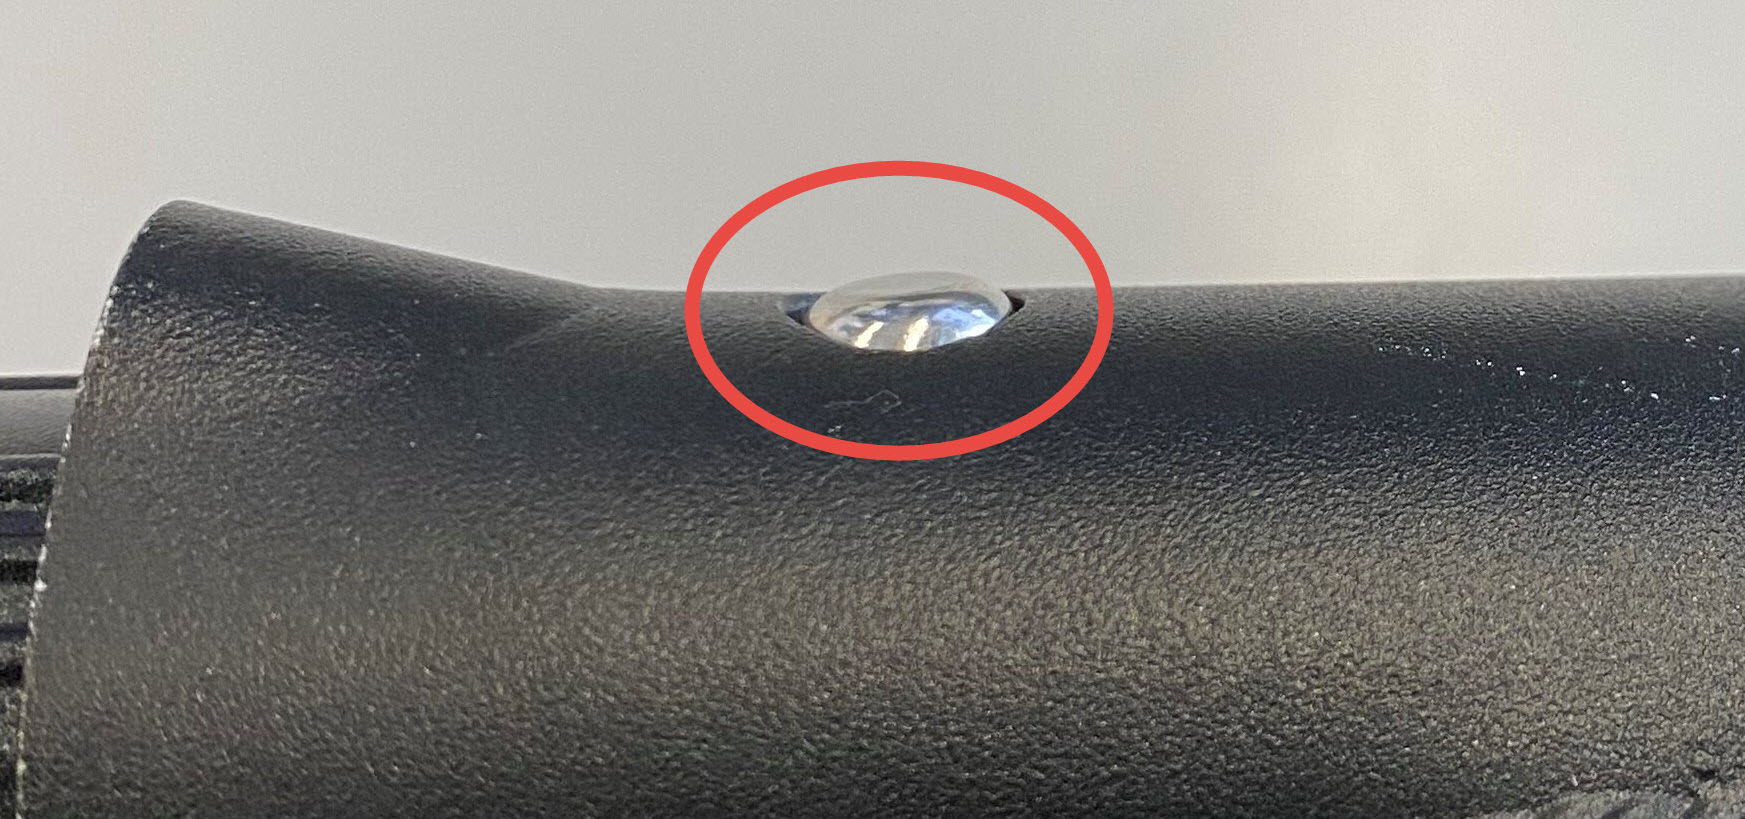 Picture 7: If your product looks like Picture 7 and the pin is not visible above the blade, the pin connection is NOT fine.